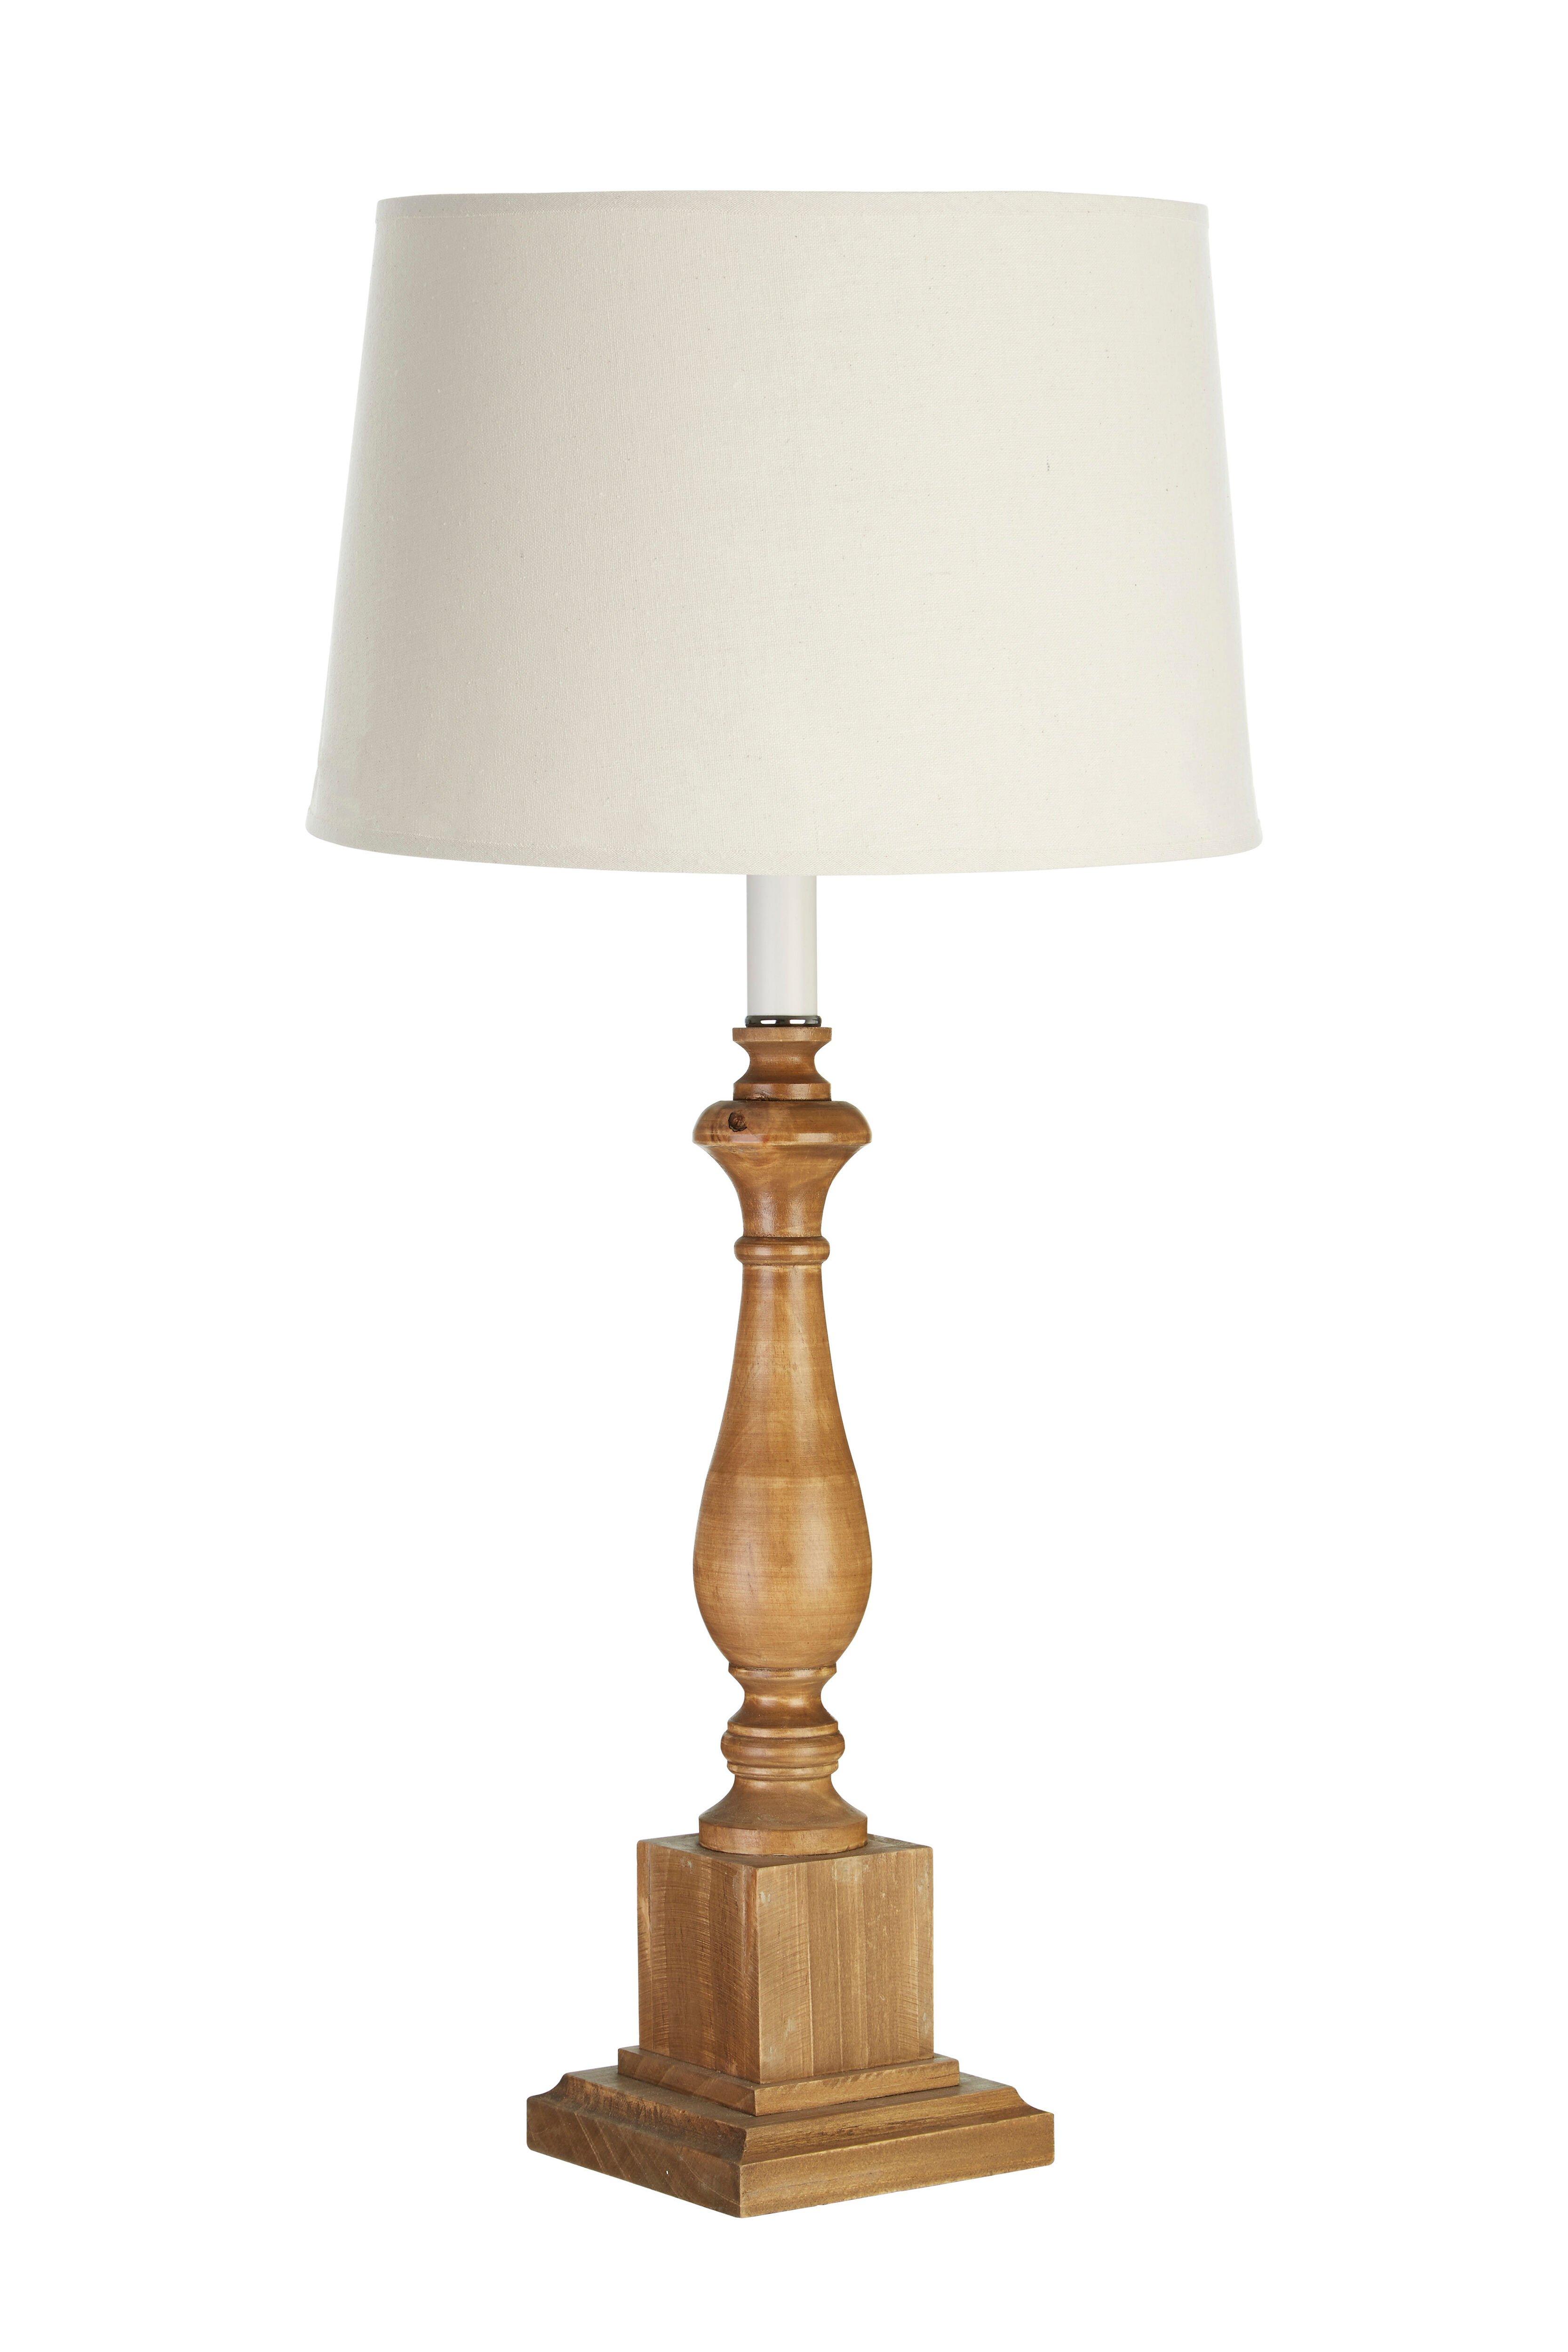 Interiors by Premier Candle Table Lamp with Square Base